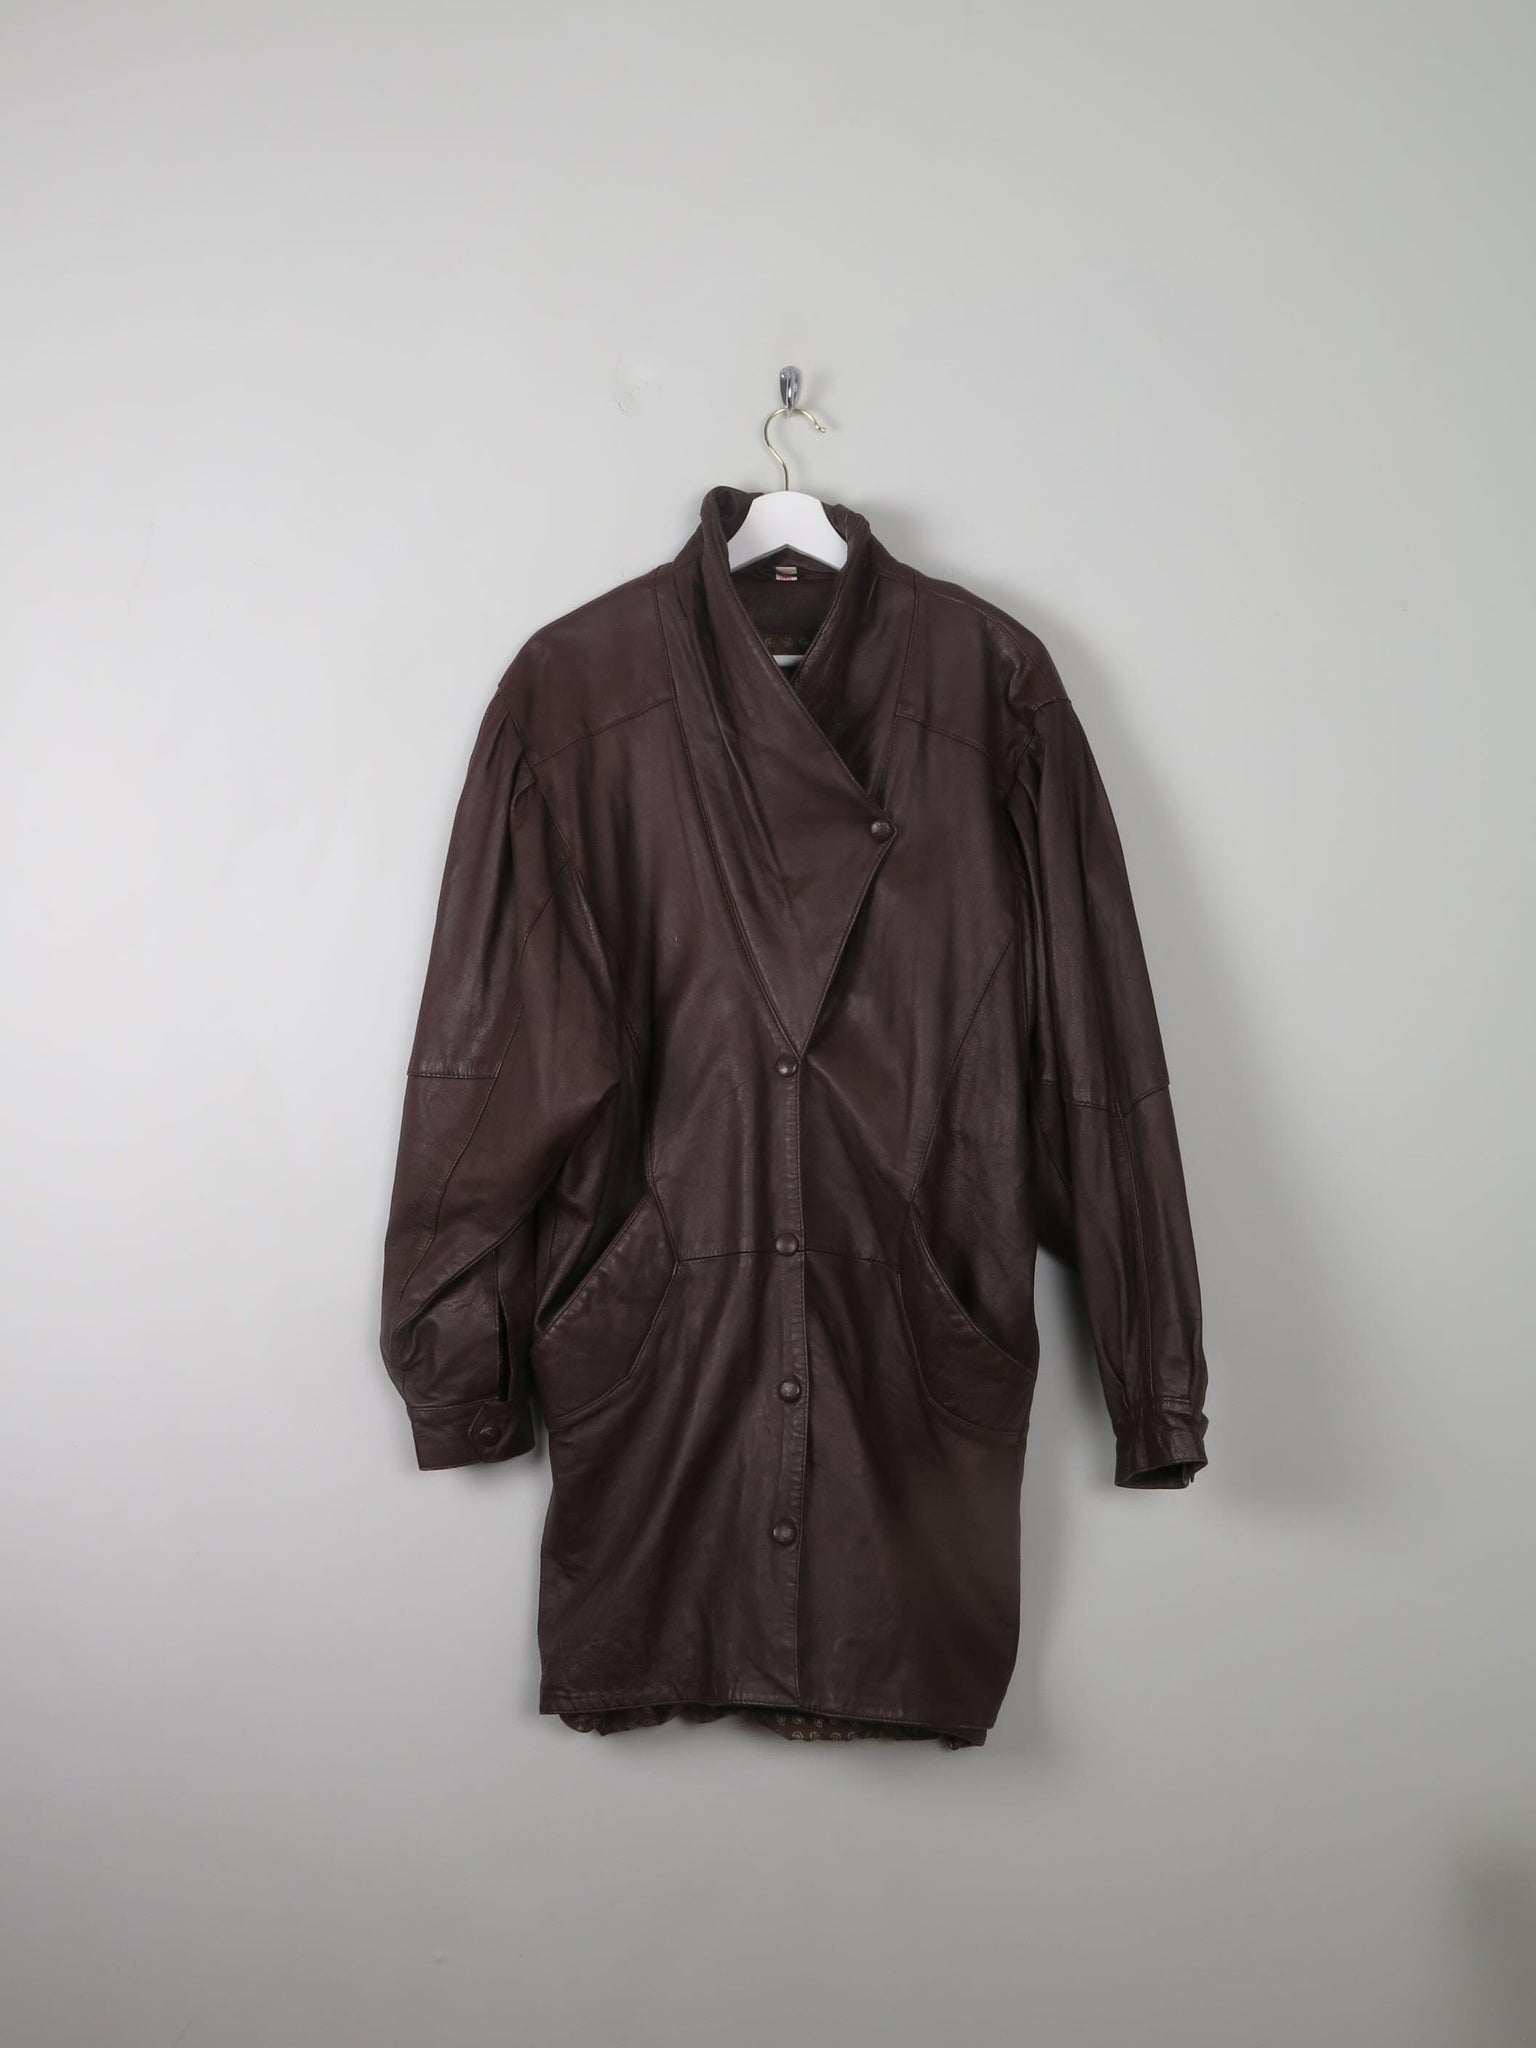 Women's Brown Leather Vintage Coat M - The Harlequin